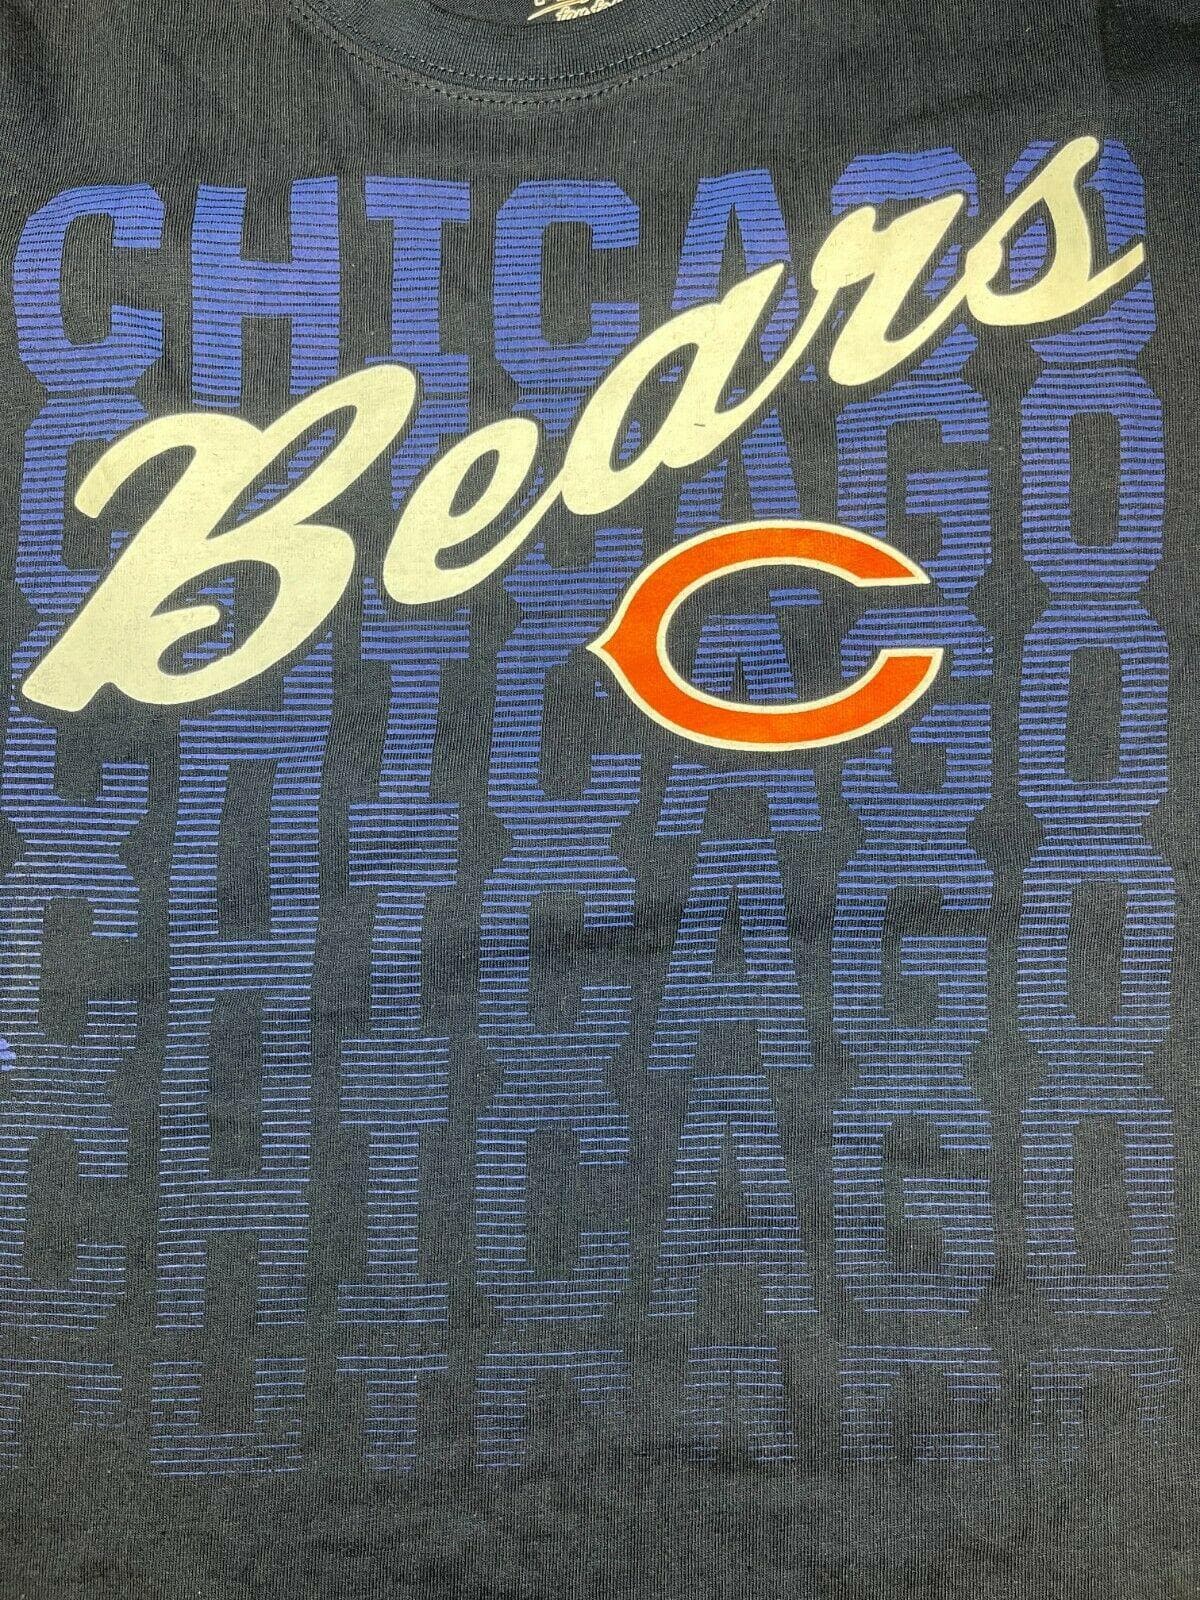 NFL Chicago Bears Majestic Women's Plus Size T-Shirt Large NWT